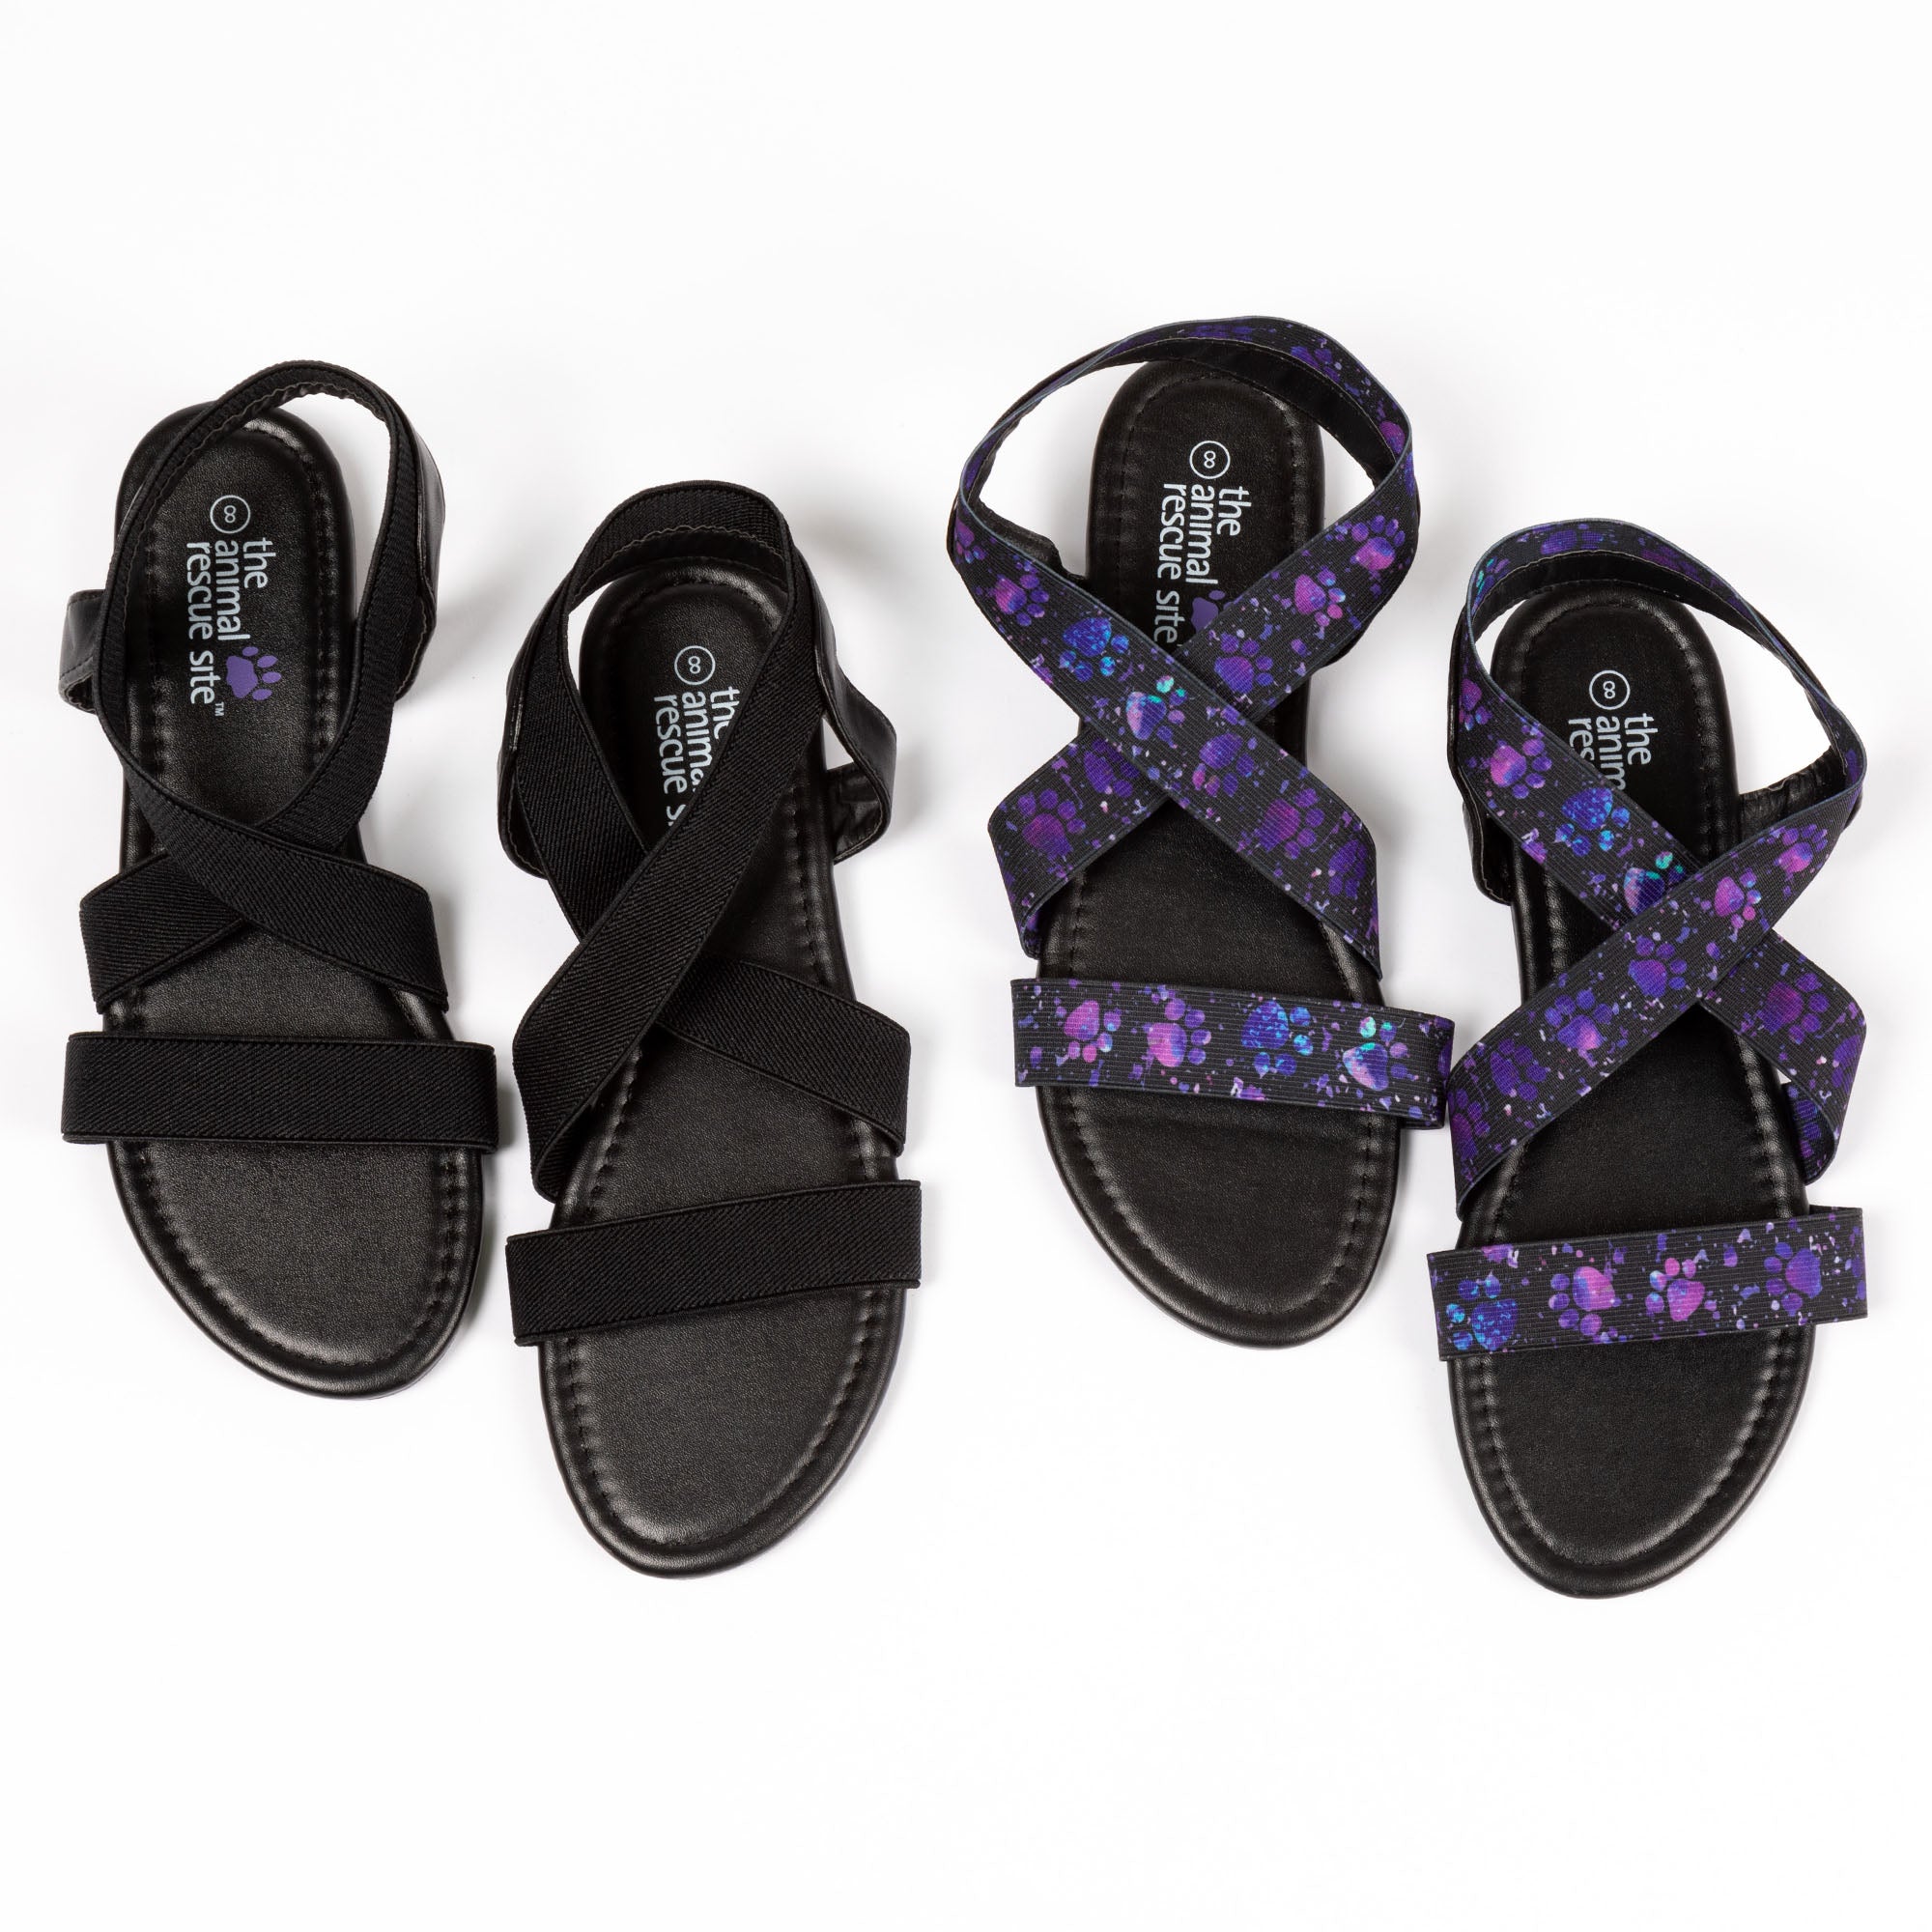 Pawsitively Stretchy Sandals - Solid Black - 10